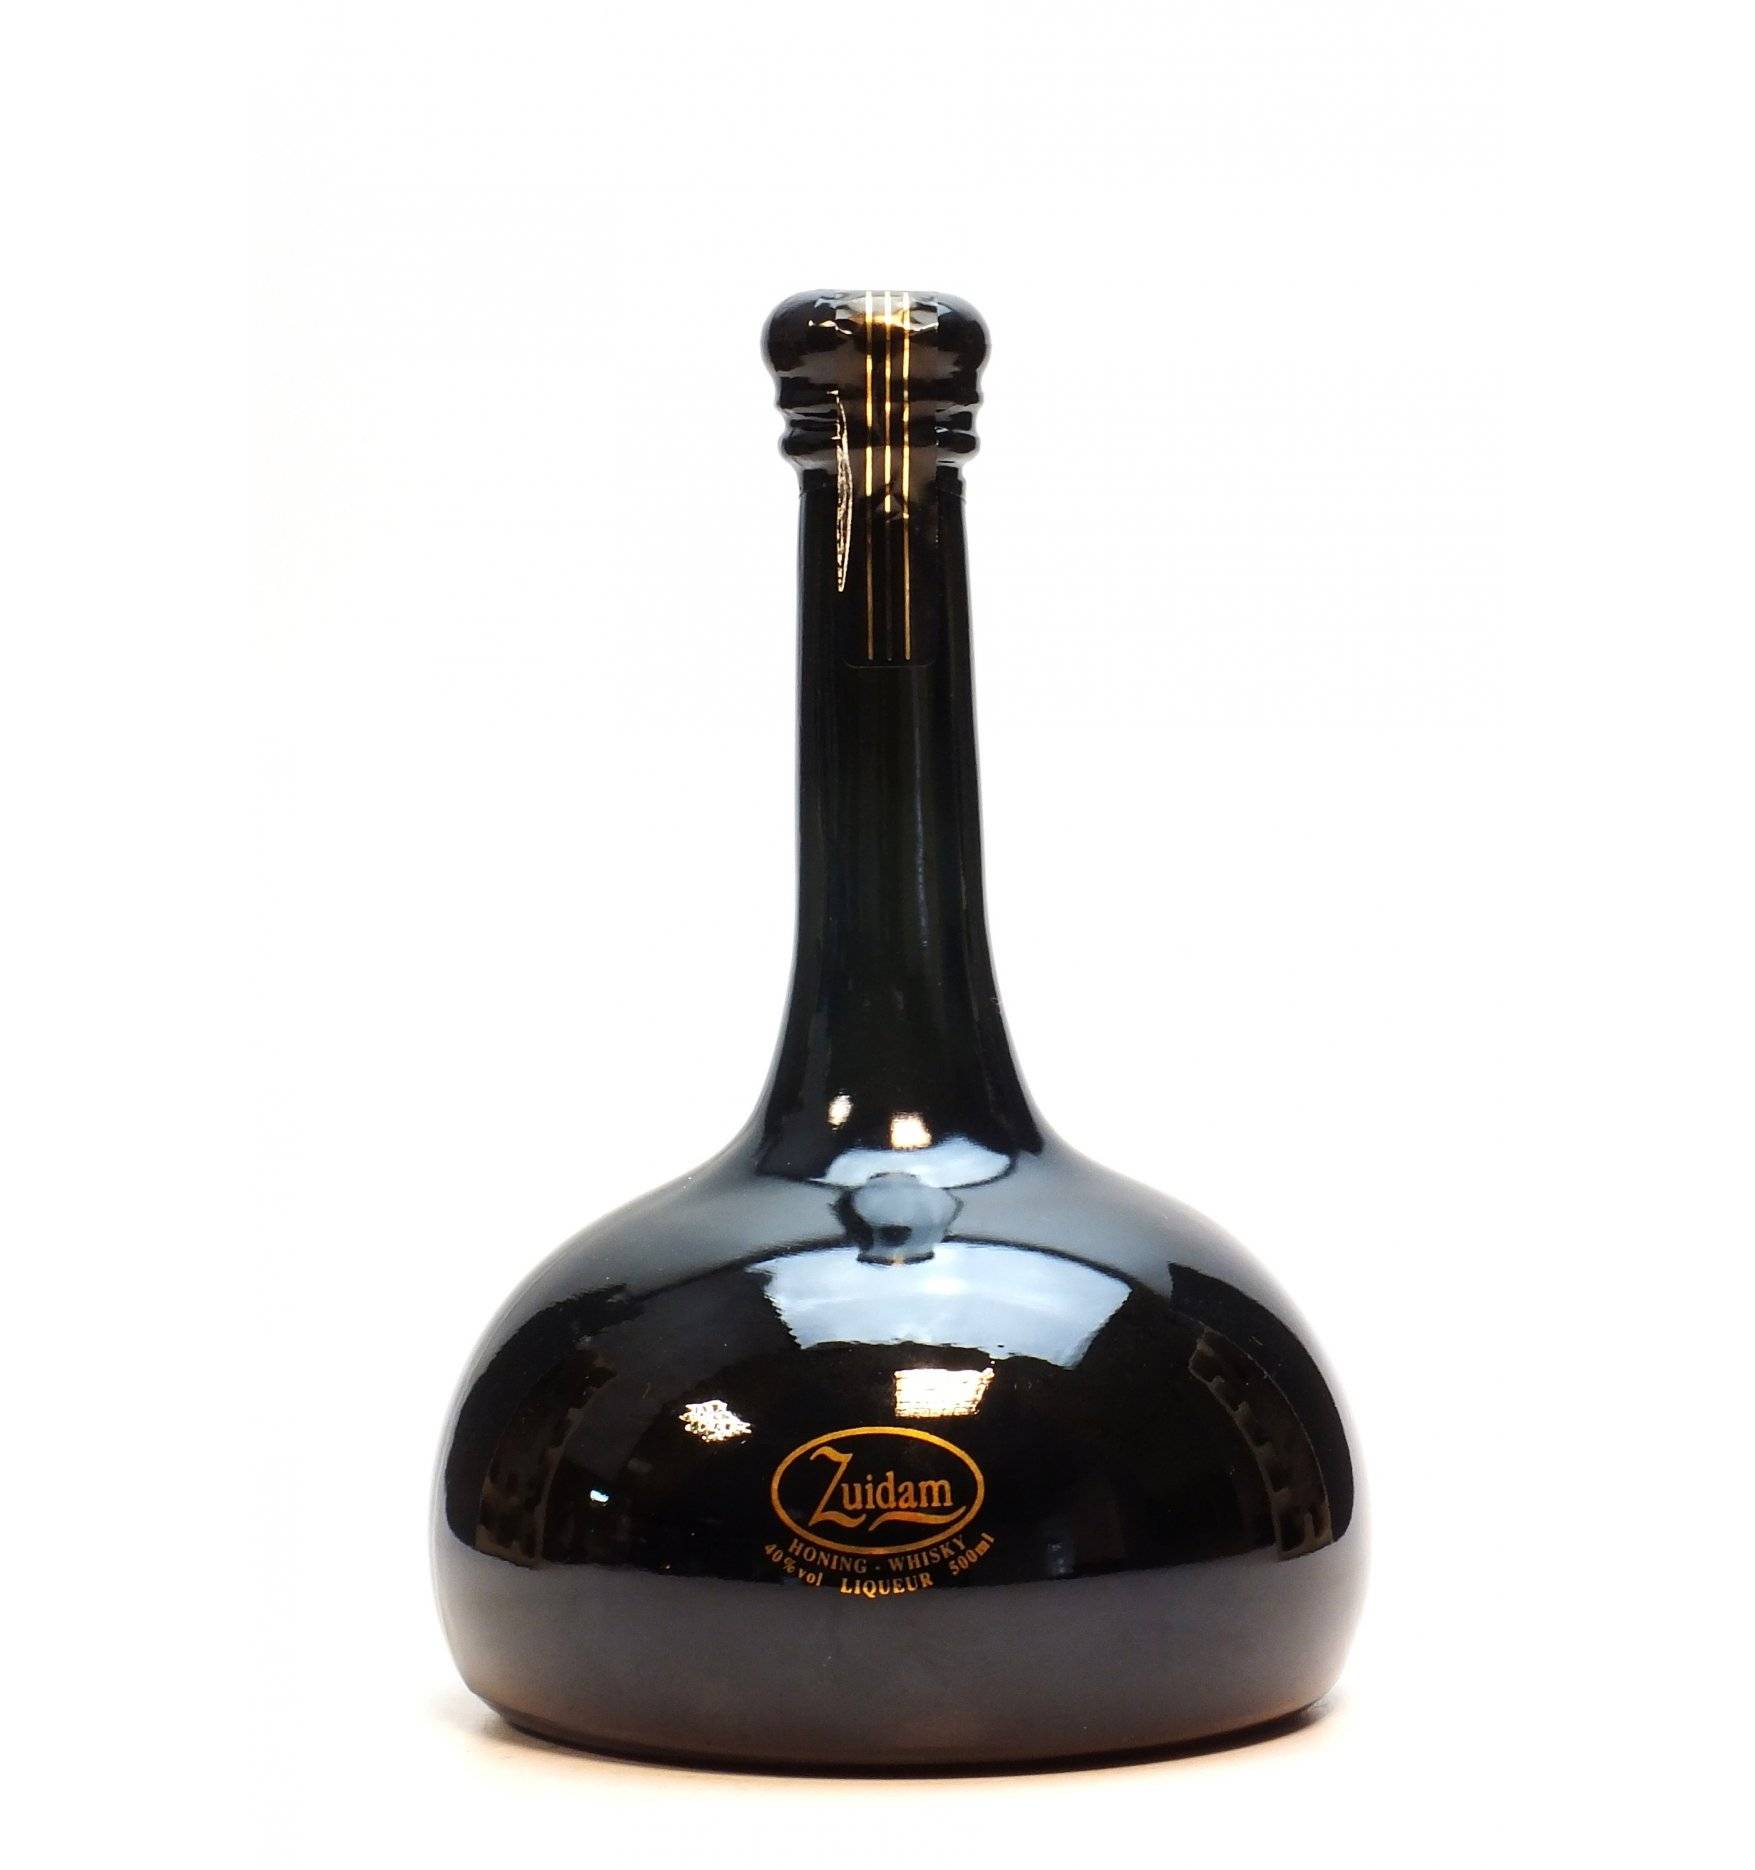 Zuidam Honey Whisky Liqueur - Just Whisky Auctions